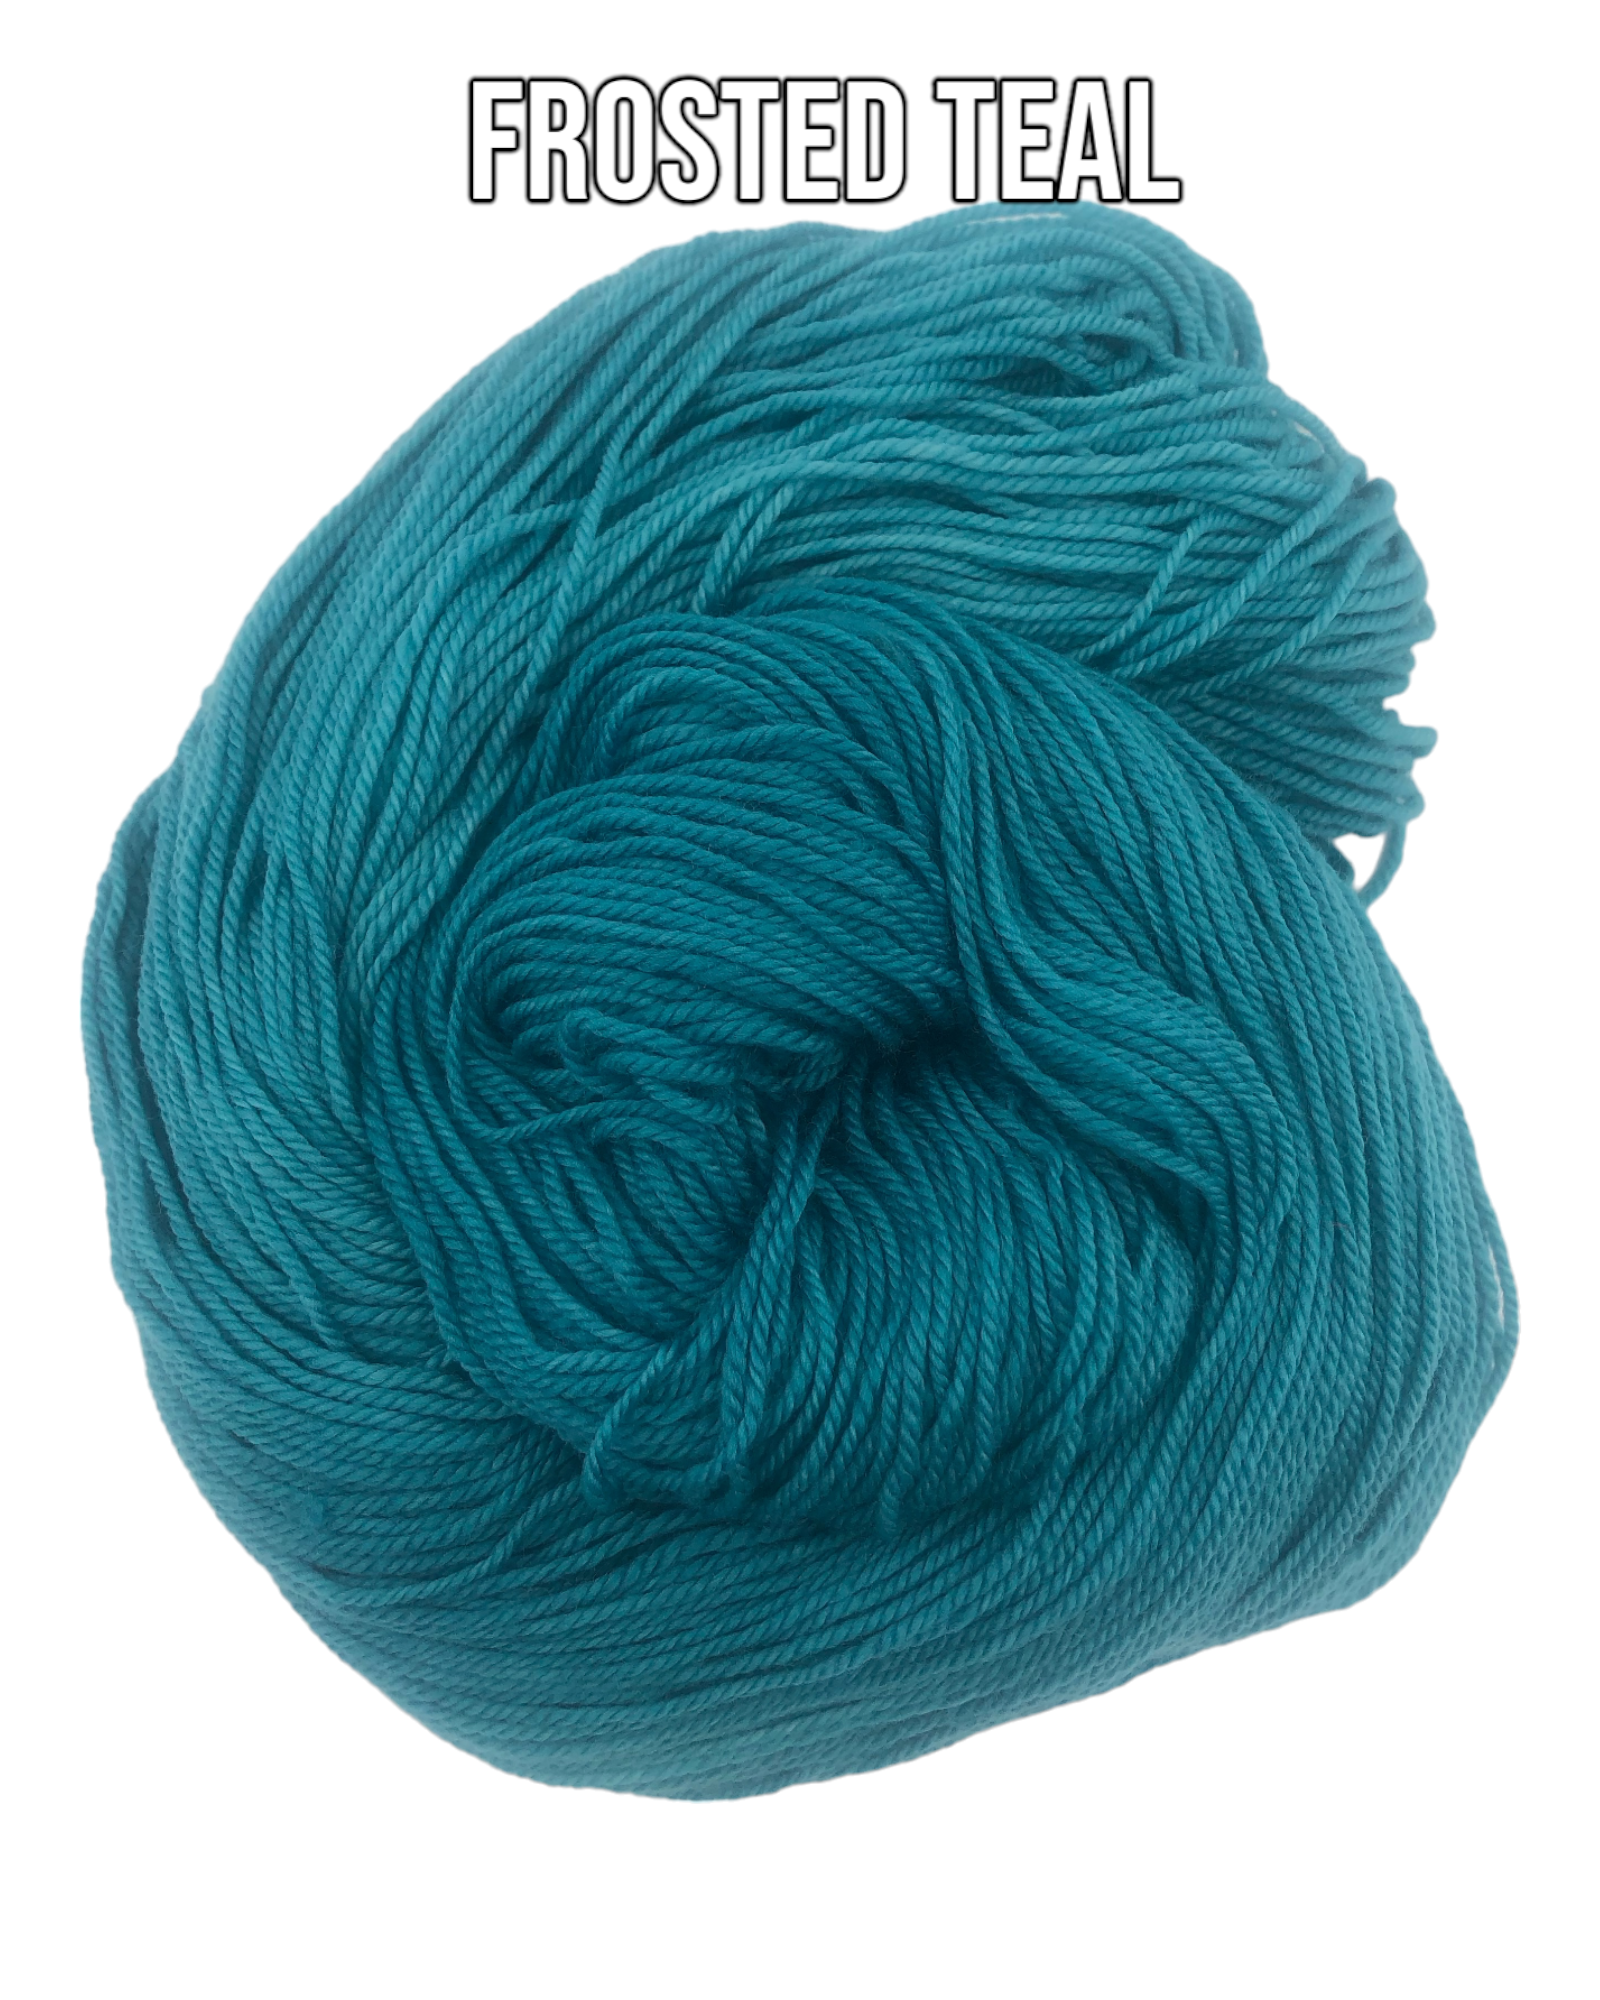 Superfine Fingering - Frosted Teal